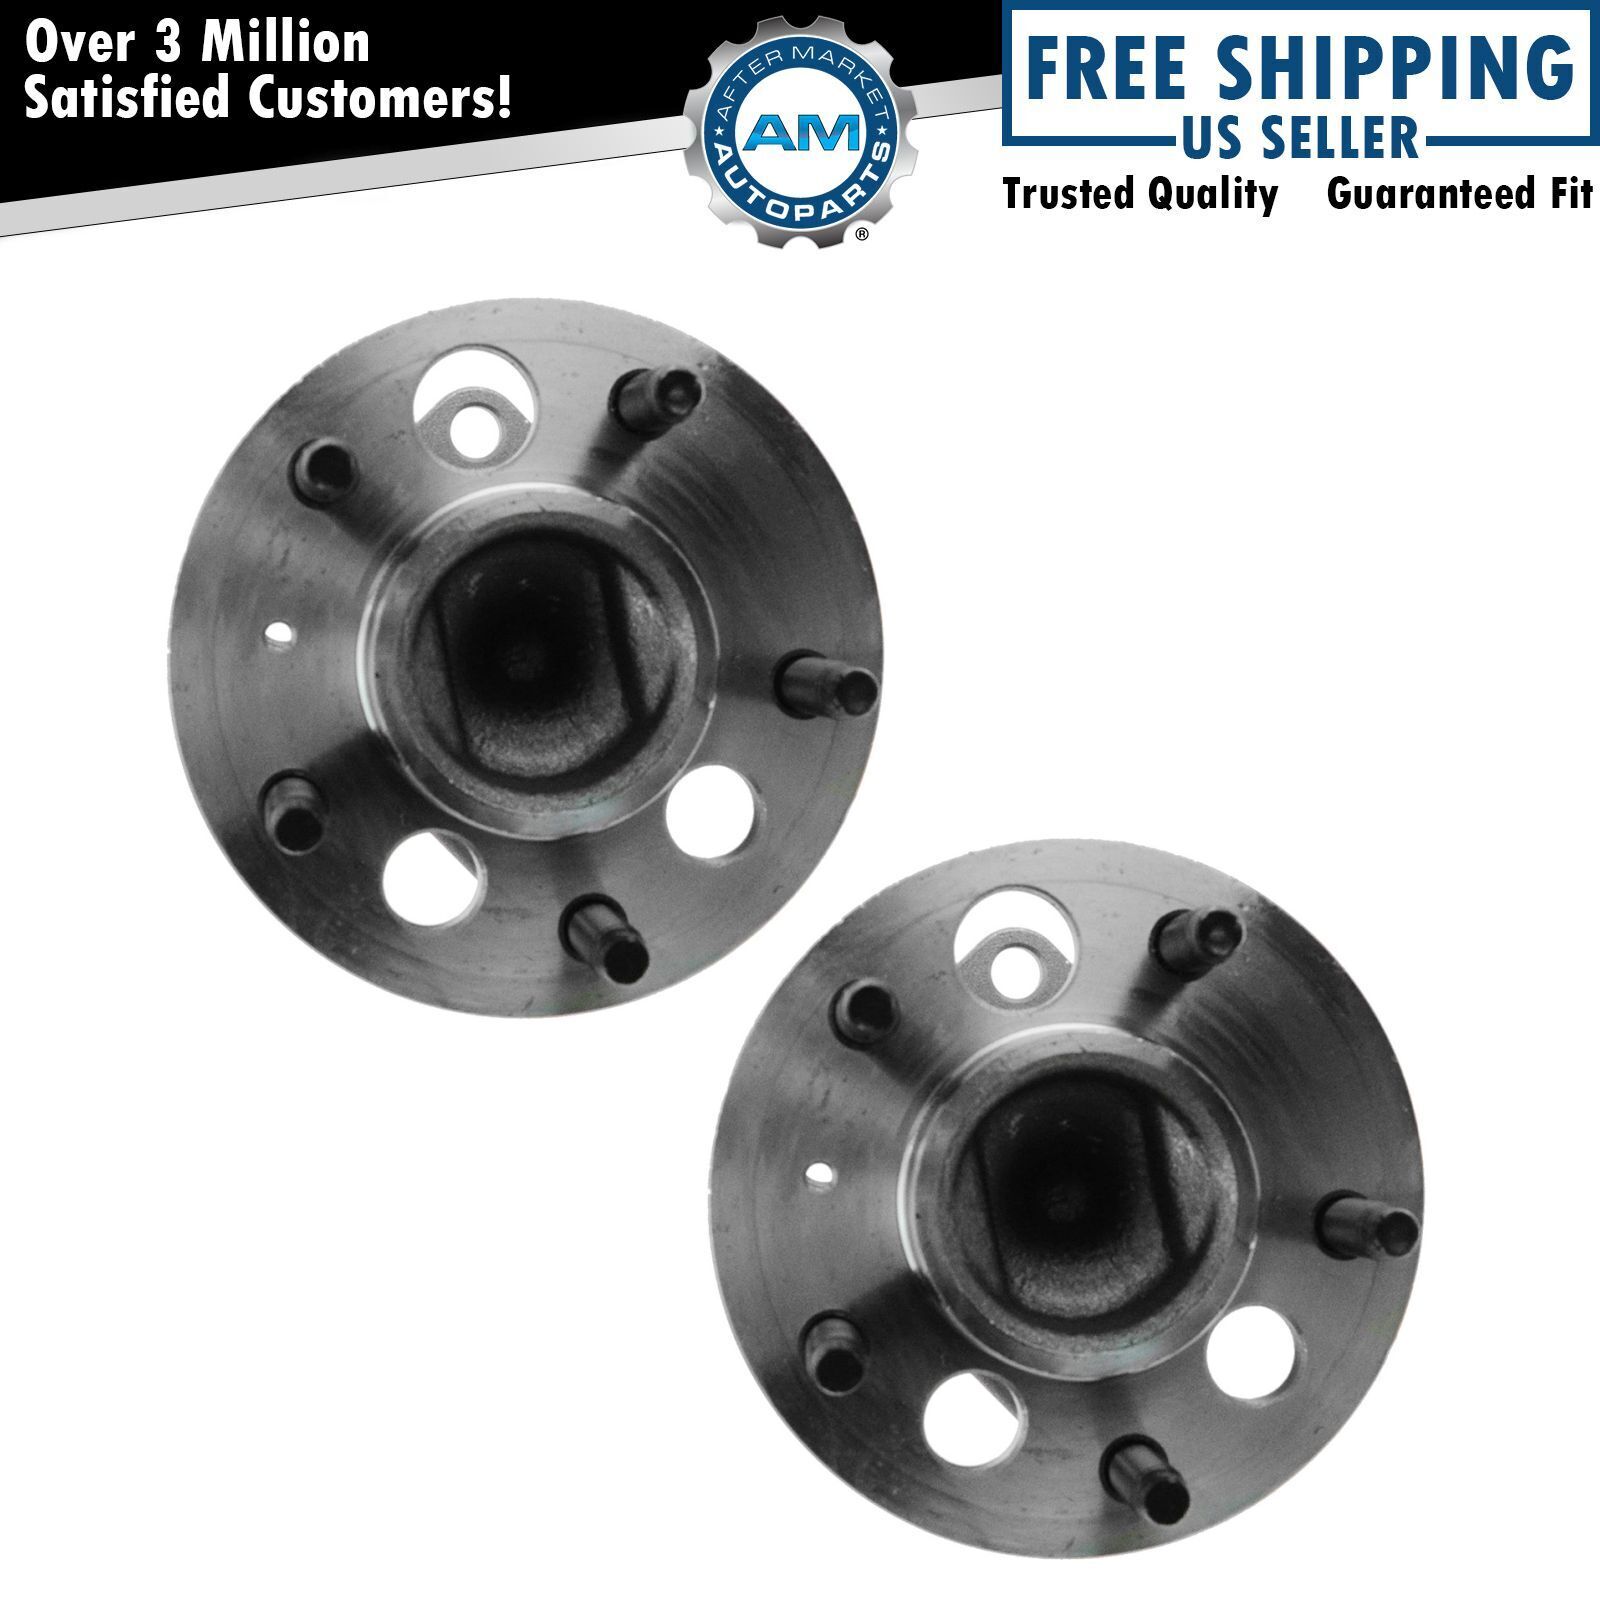 2 Rear Wheel Bearing Hub Assembly Fits Buick Chevy Olds Pontiac w/ ABS